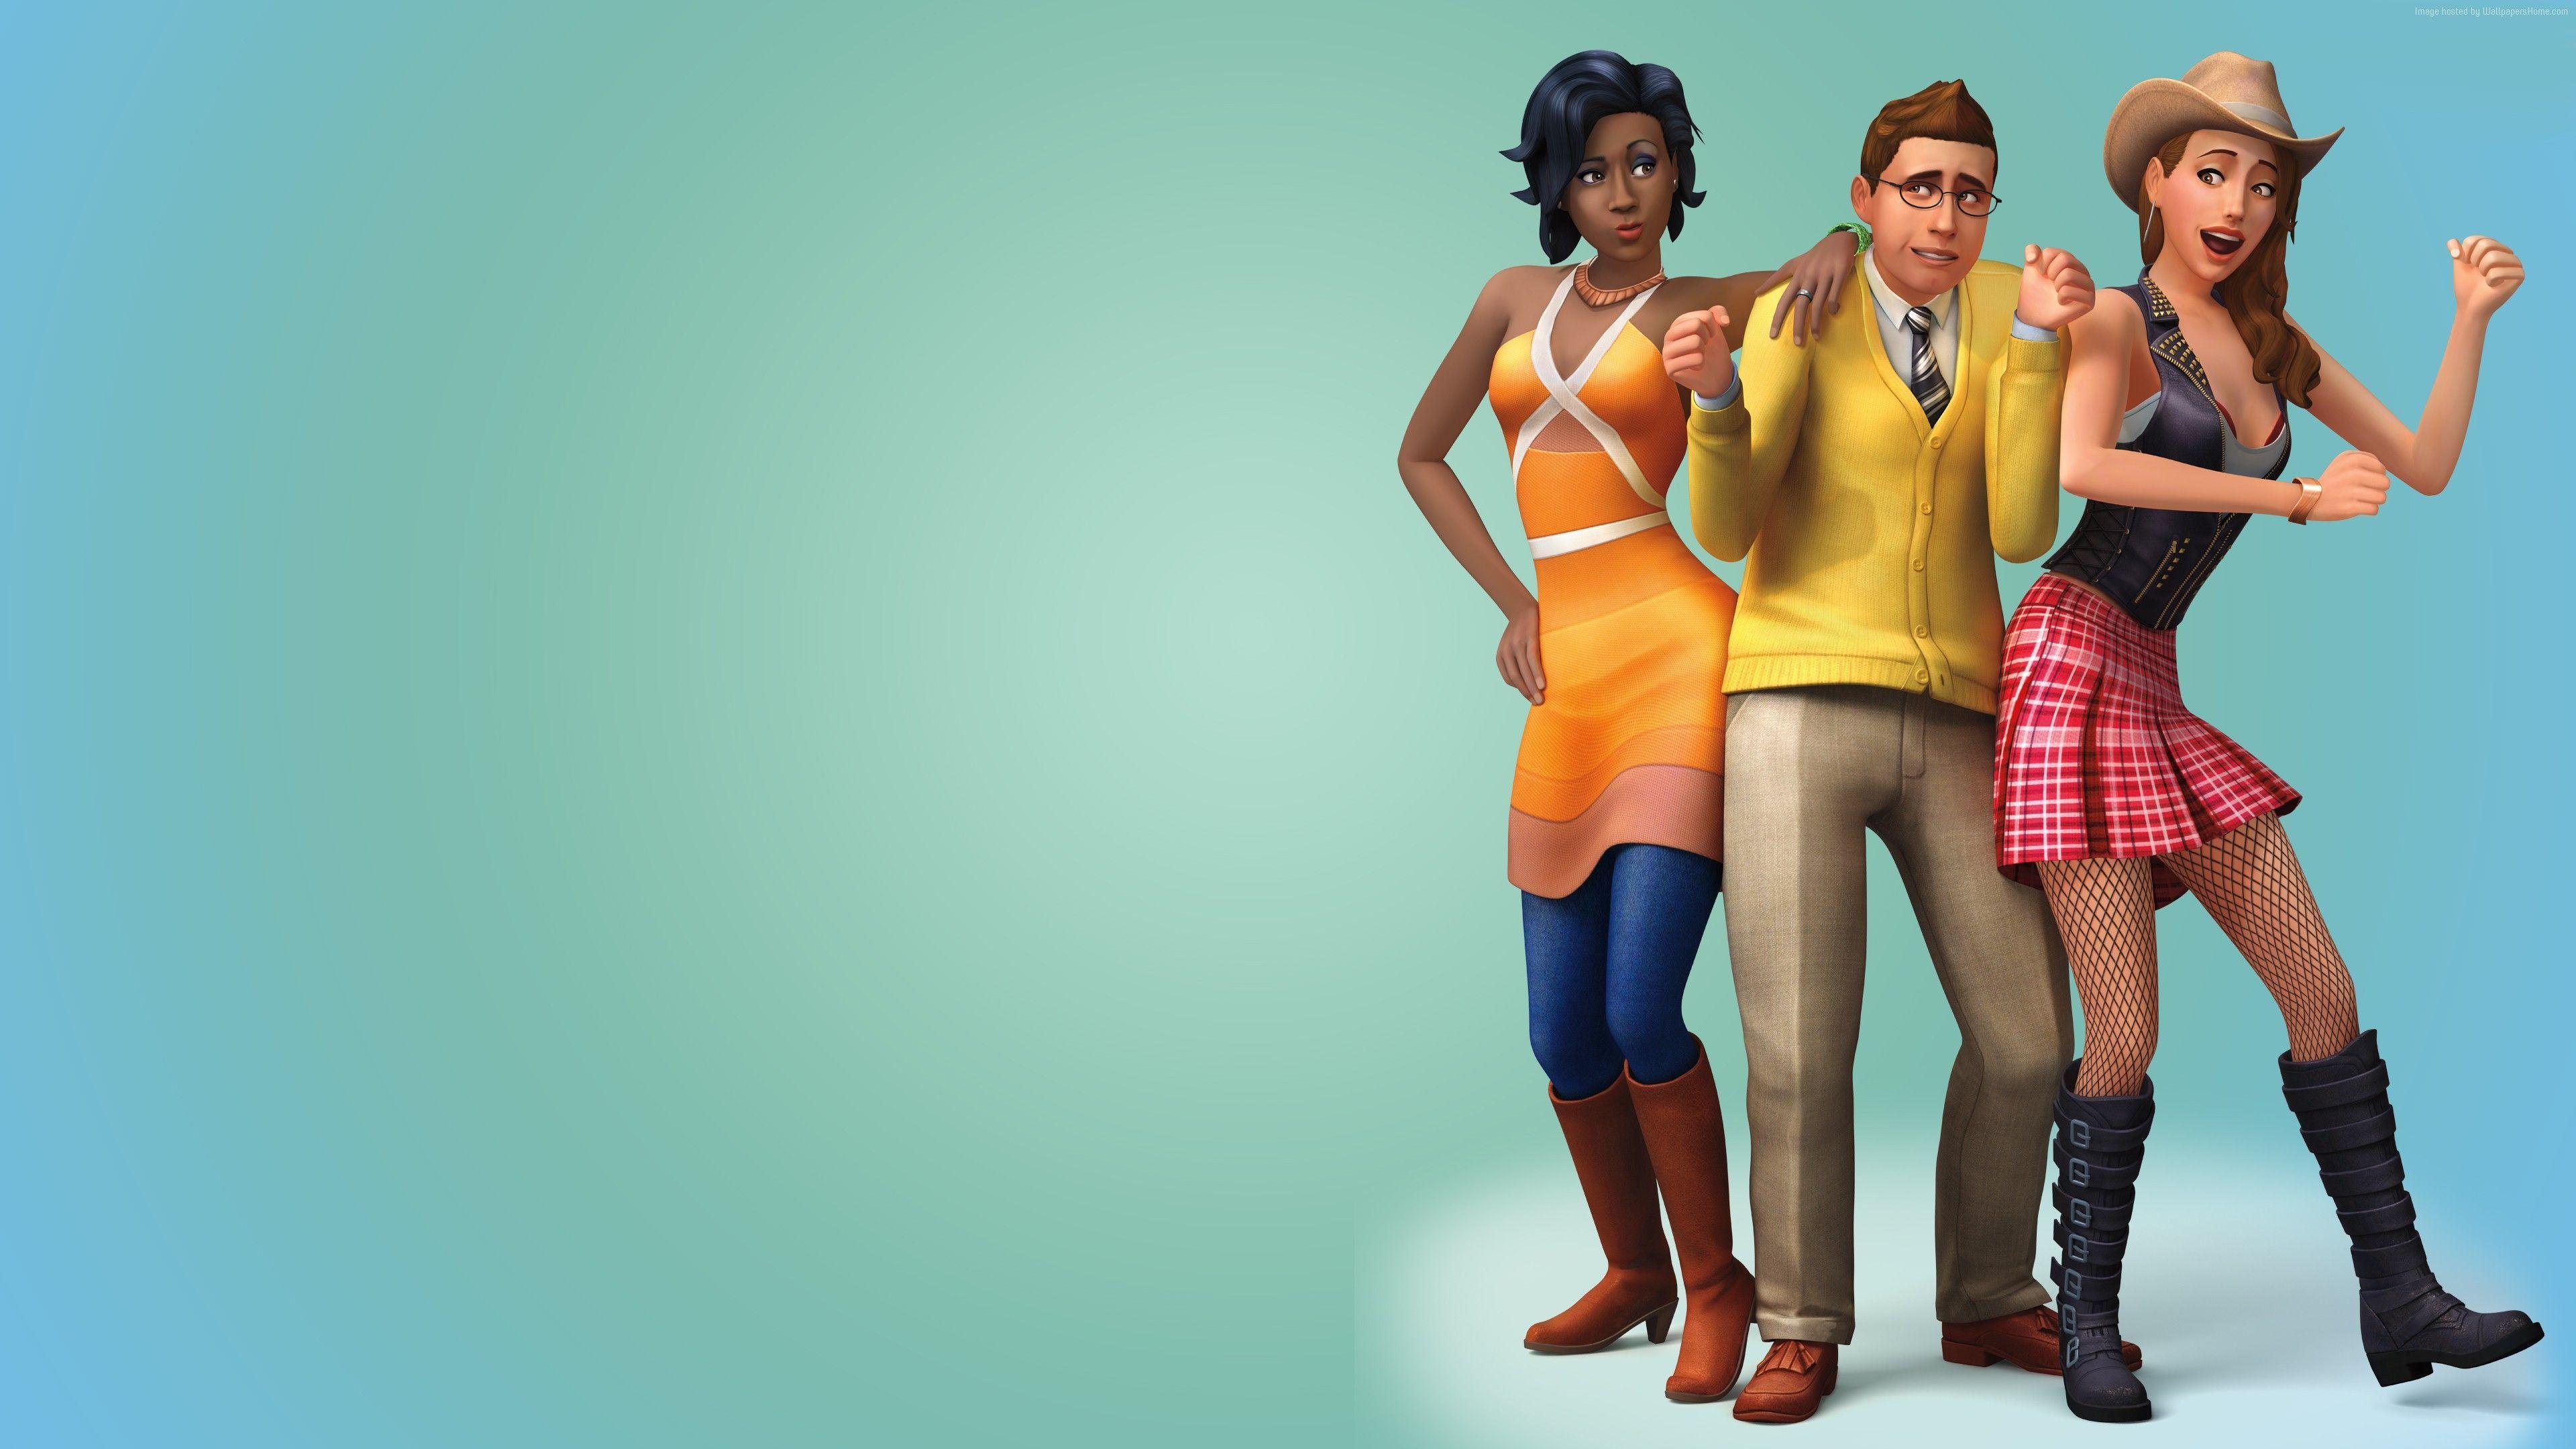 The Sims 4: Get to Work Wallpaper, Games: The Sims 4: Get to Work